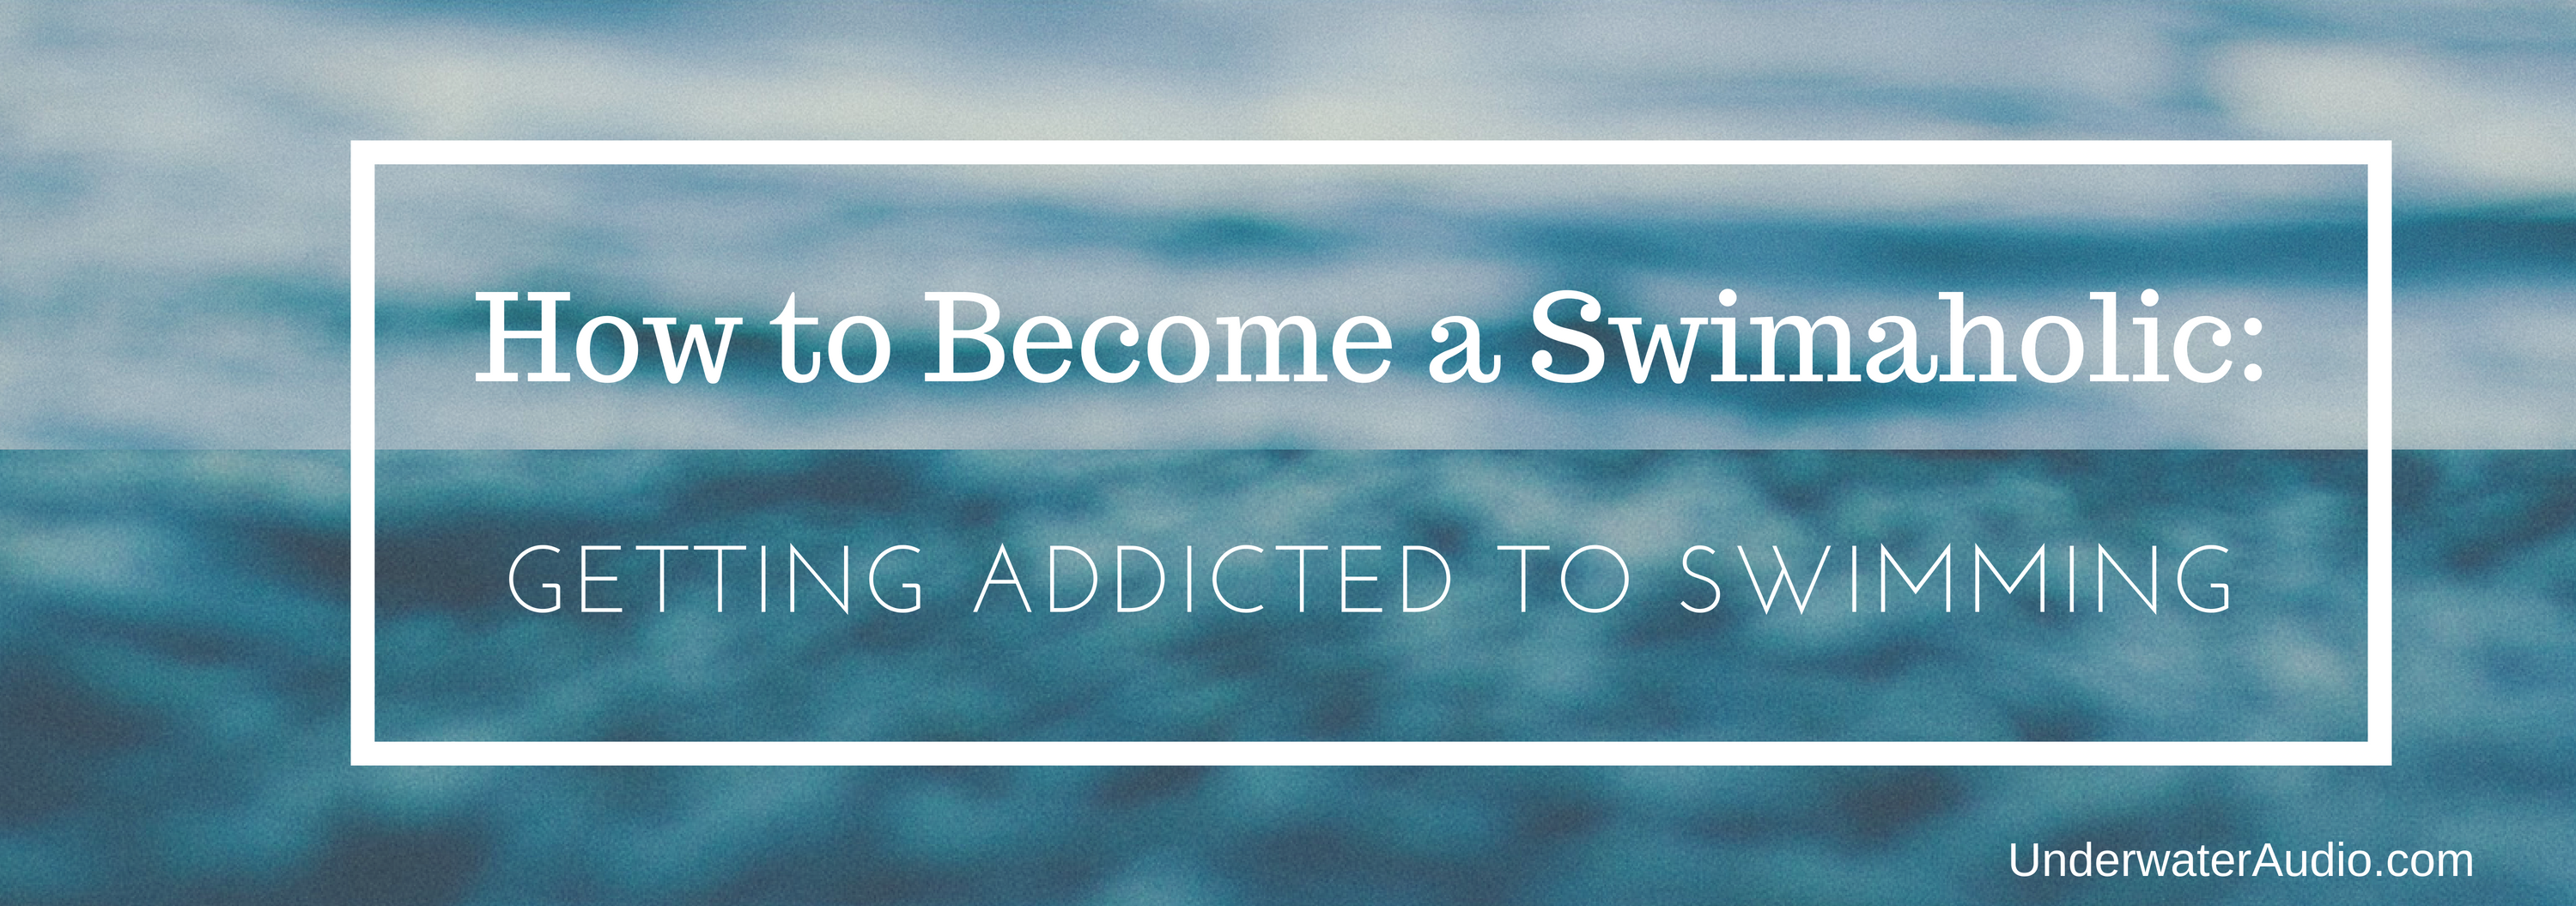 How to Become a Swimaholic: Getting Addicted to Swimming